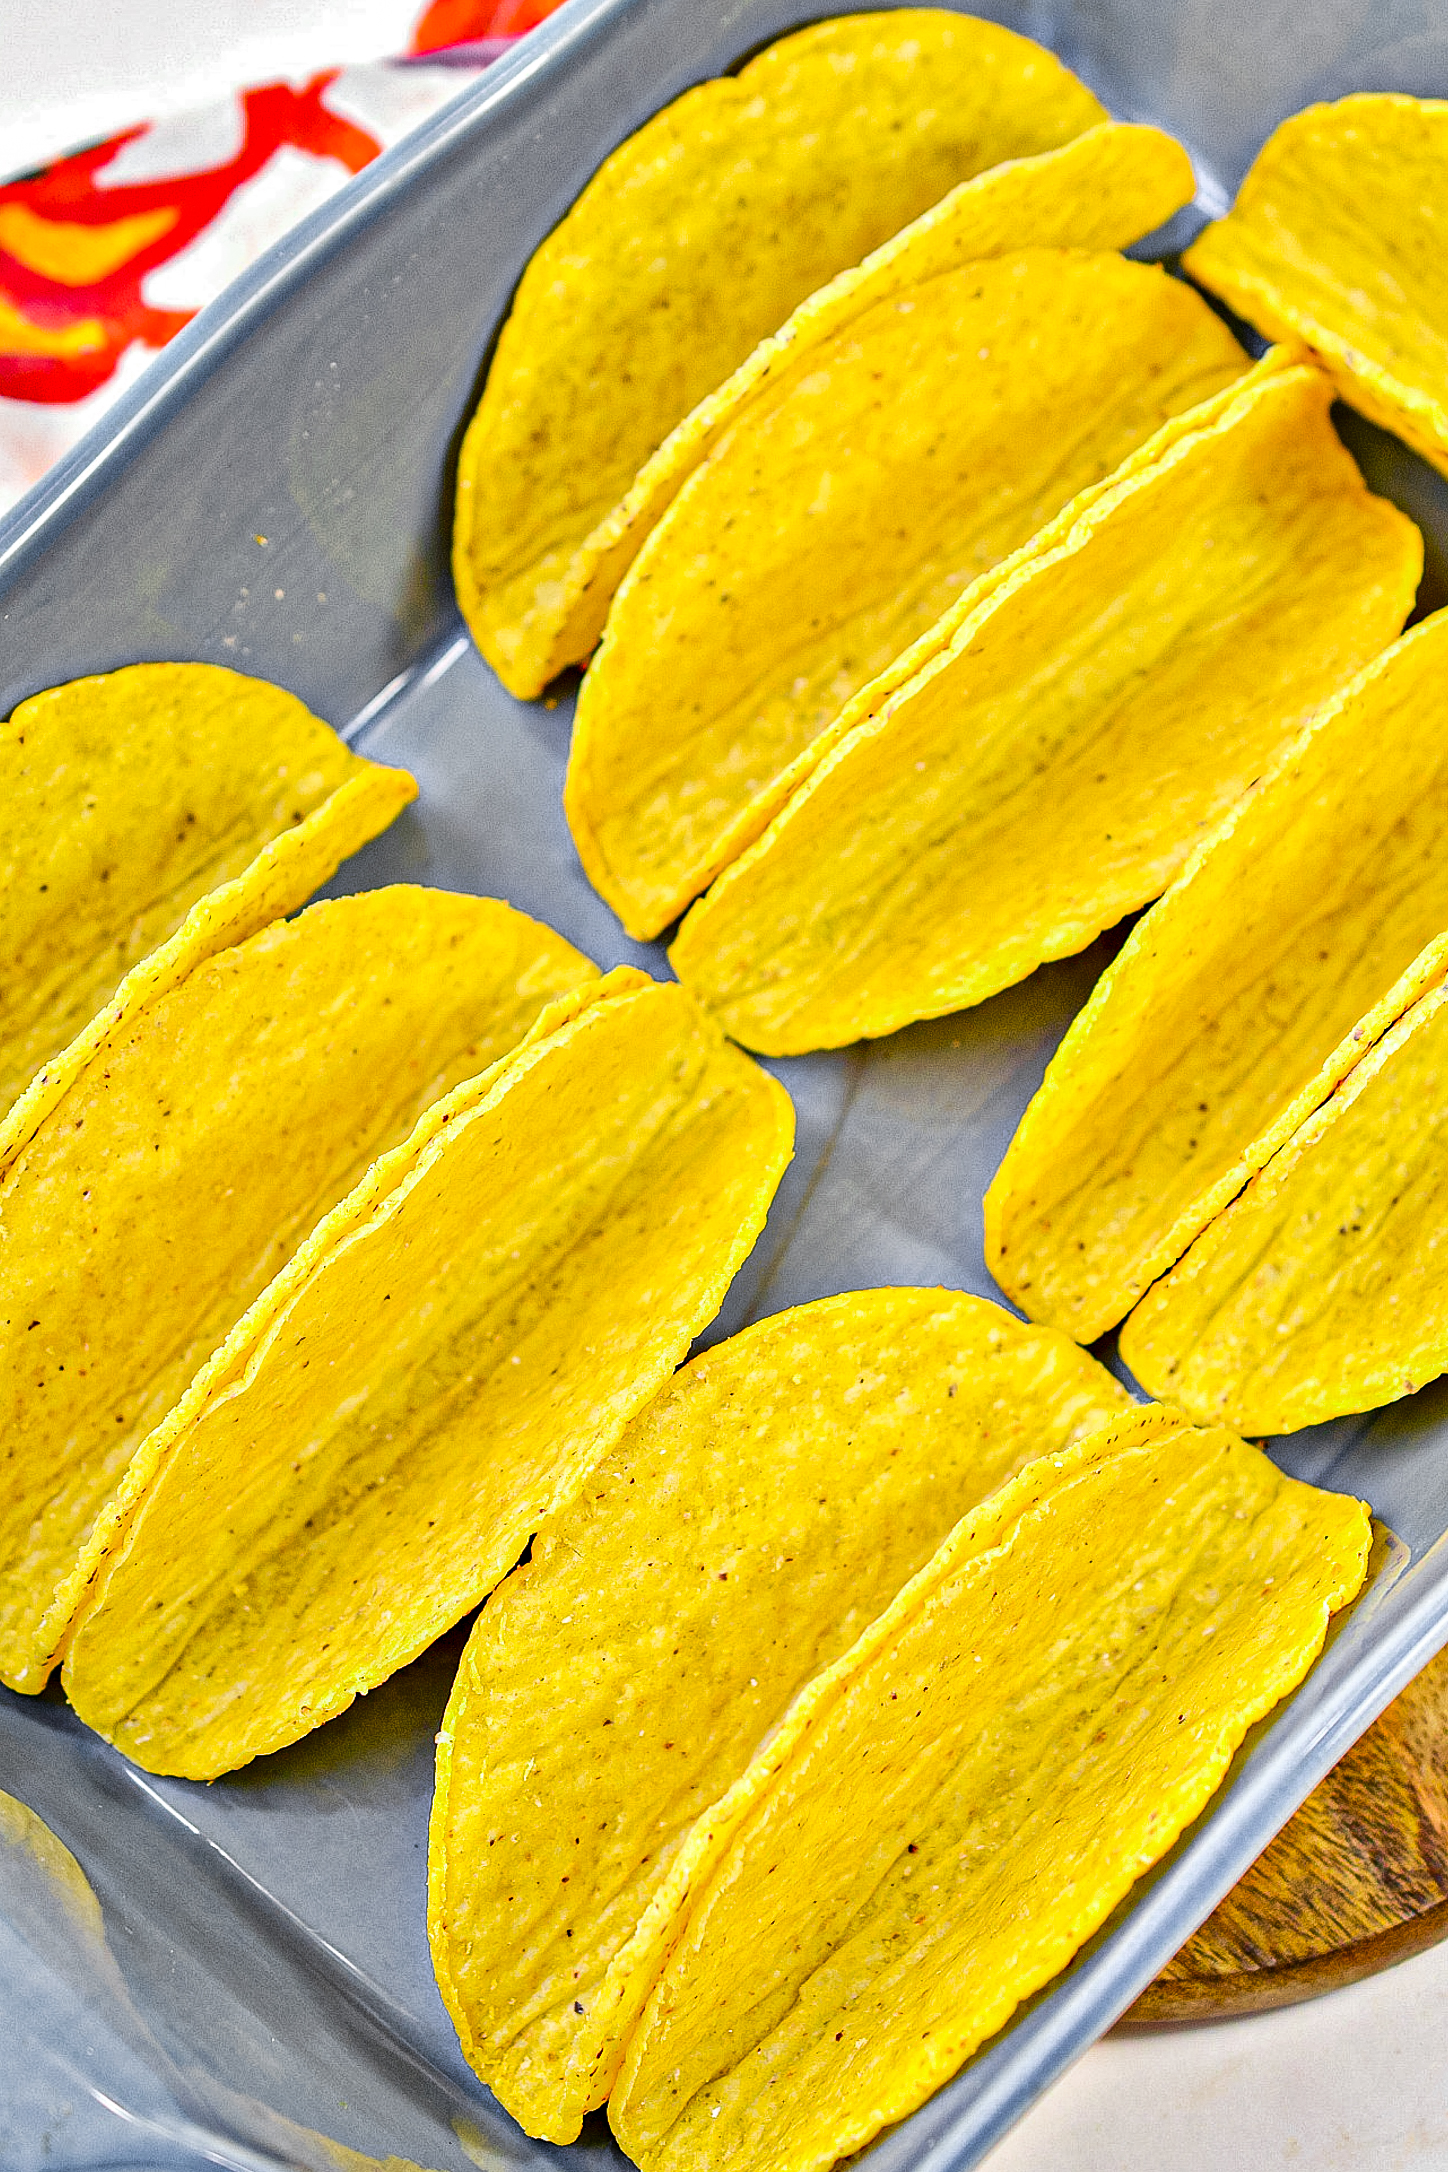 Line the taco shells standing upright in a 9x13 baking dish.